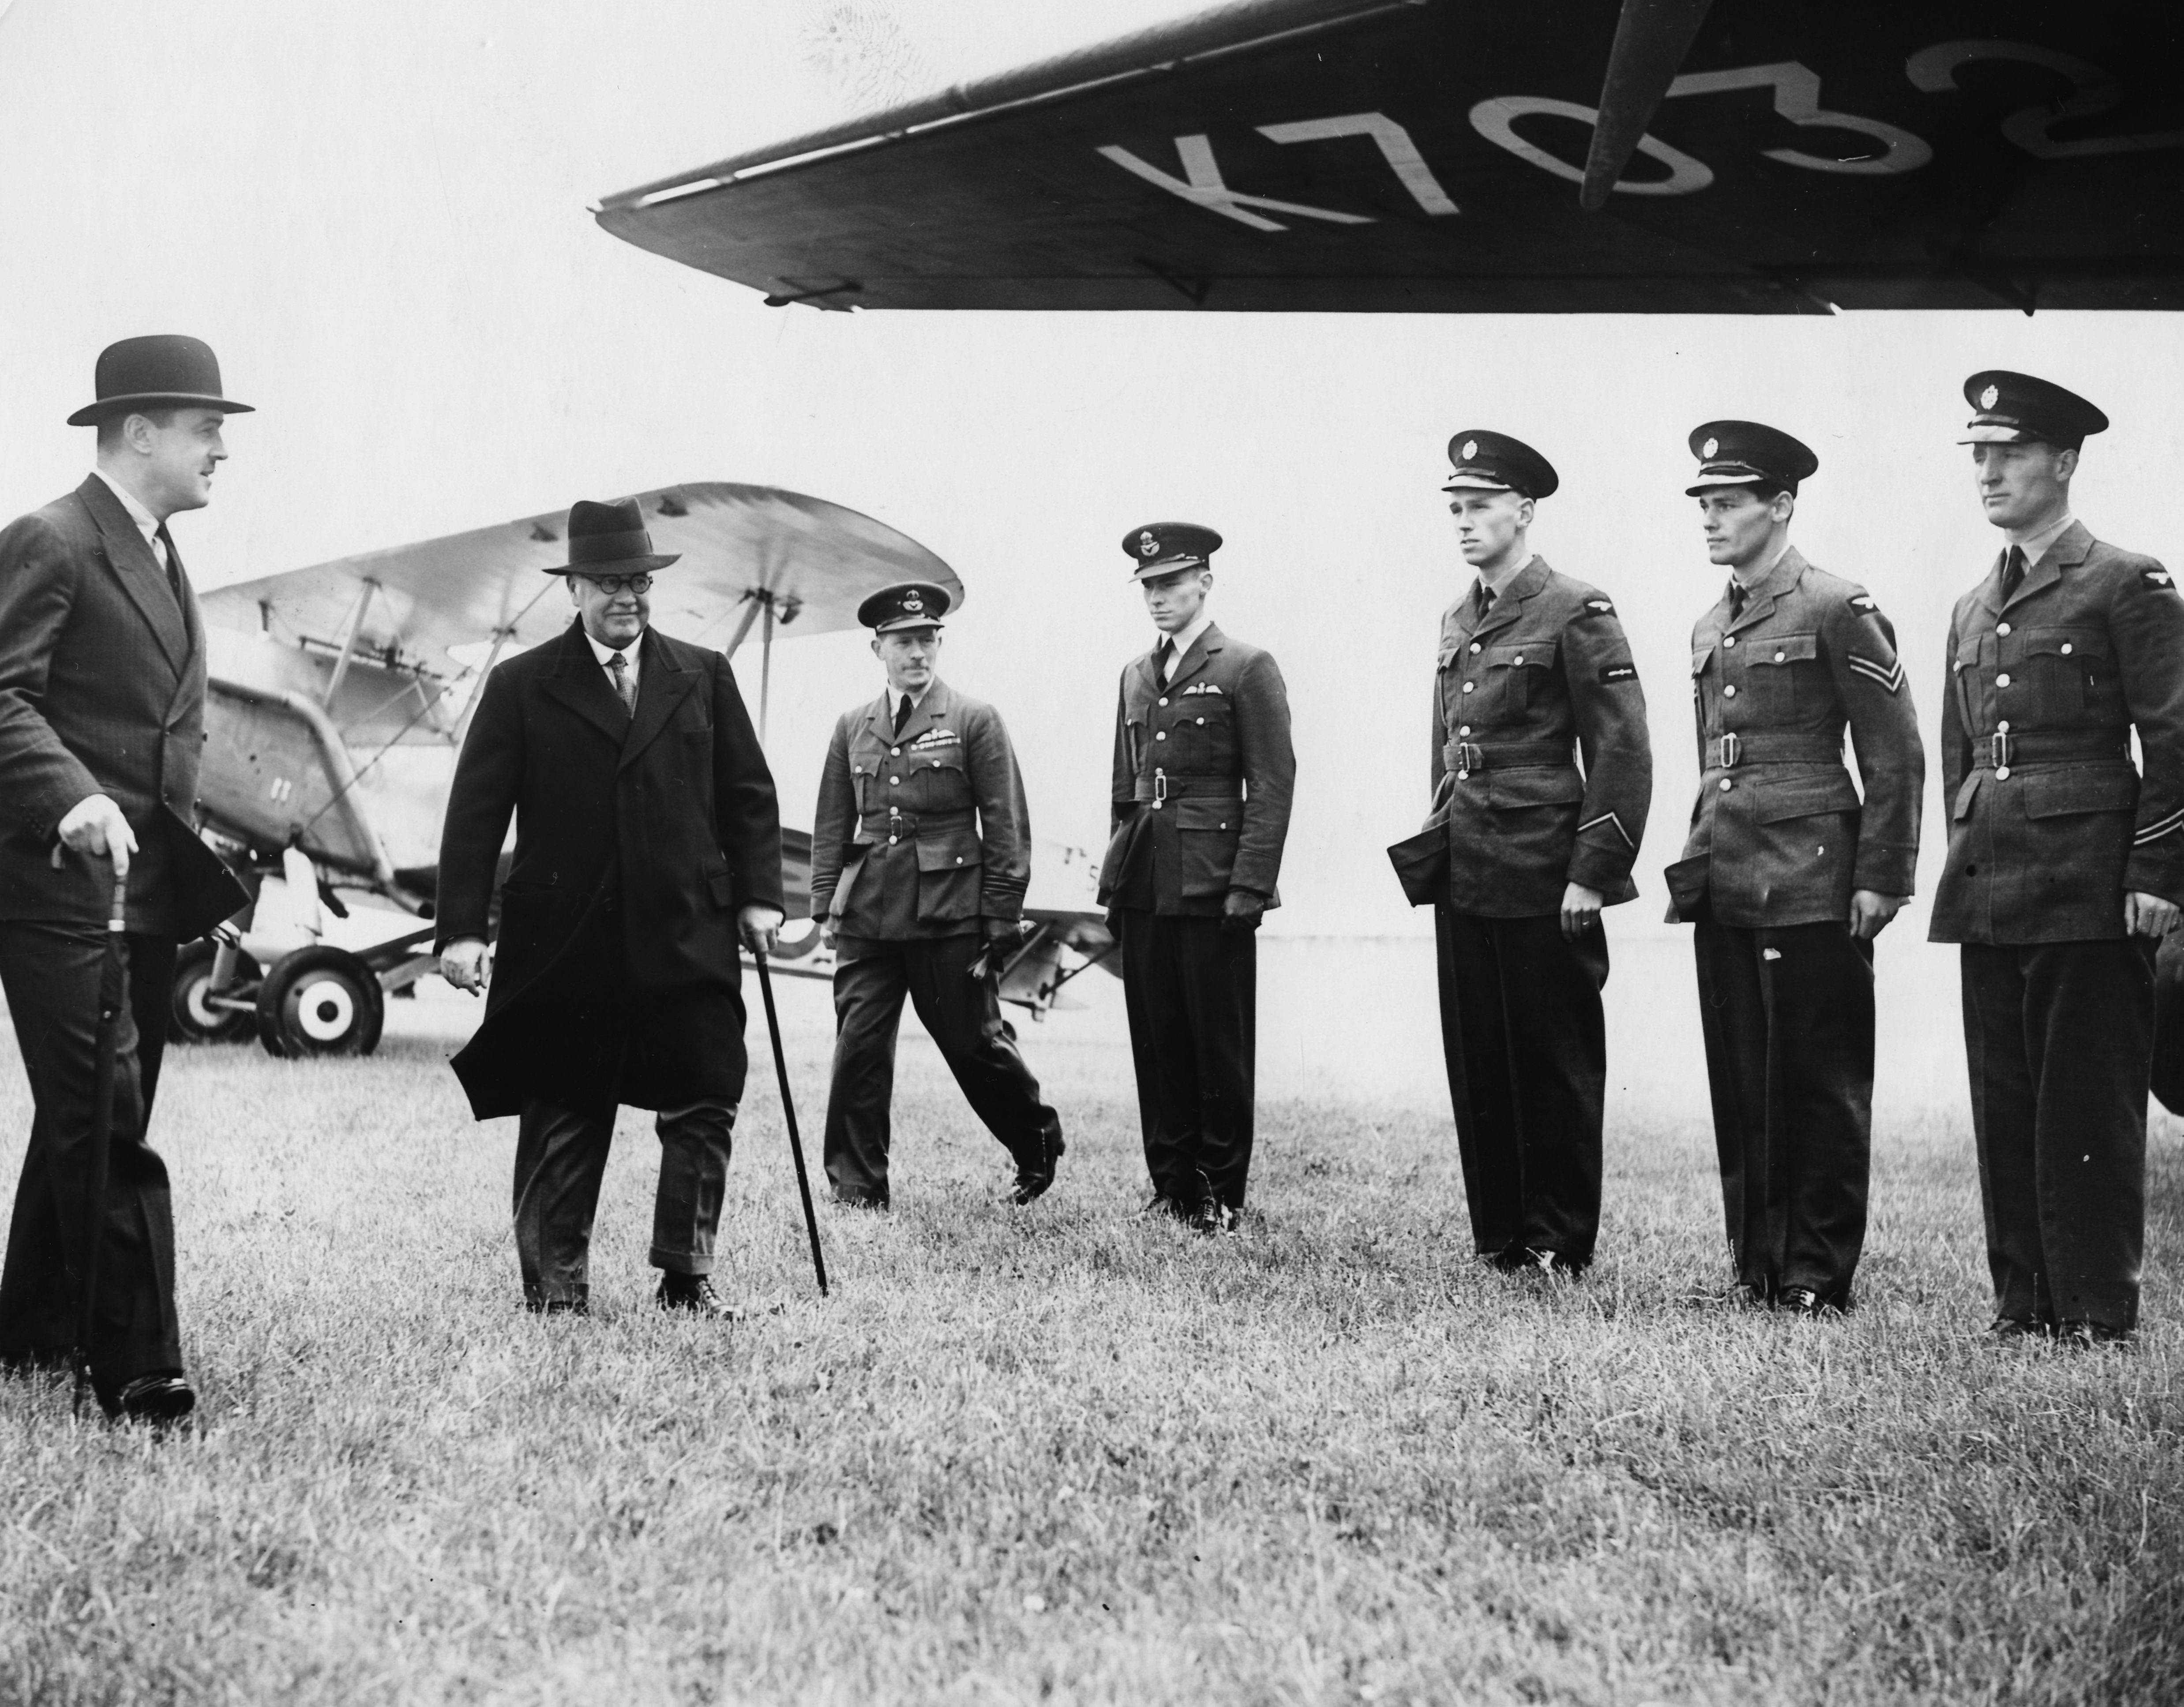 GettyImages-551452639 - British Air Minister Sir Kingsley Wood inspecting the aircraft, flanked by RAF airmen, as he opens the new Manchester Airport, England, June 26th 1938. (Photo by Fox Photos/Hulton Archive/Getty Images)